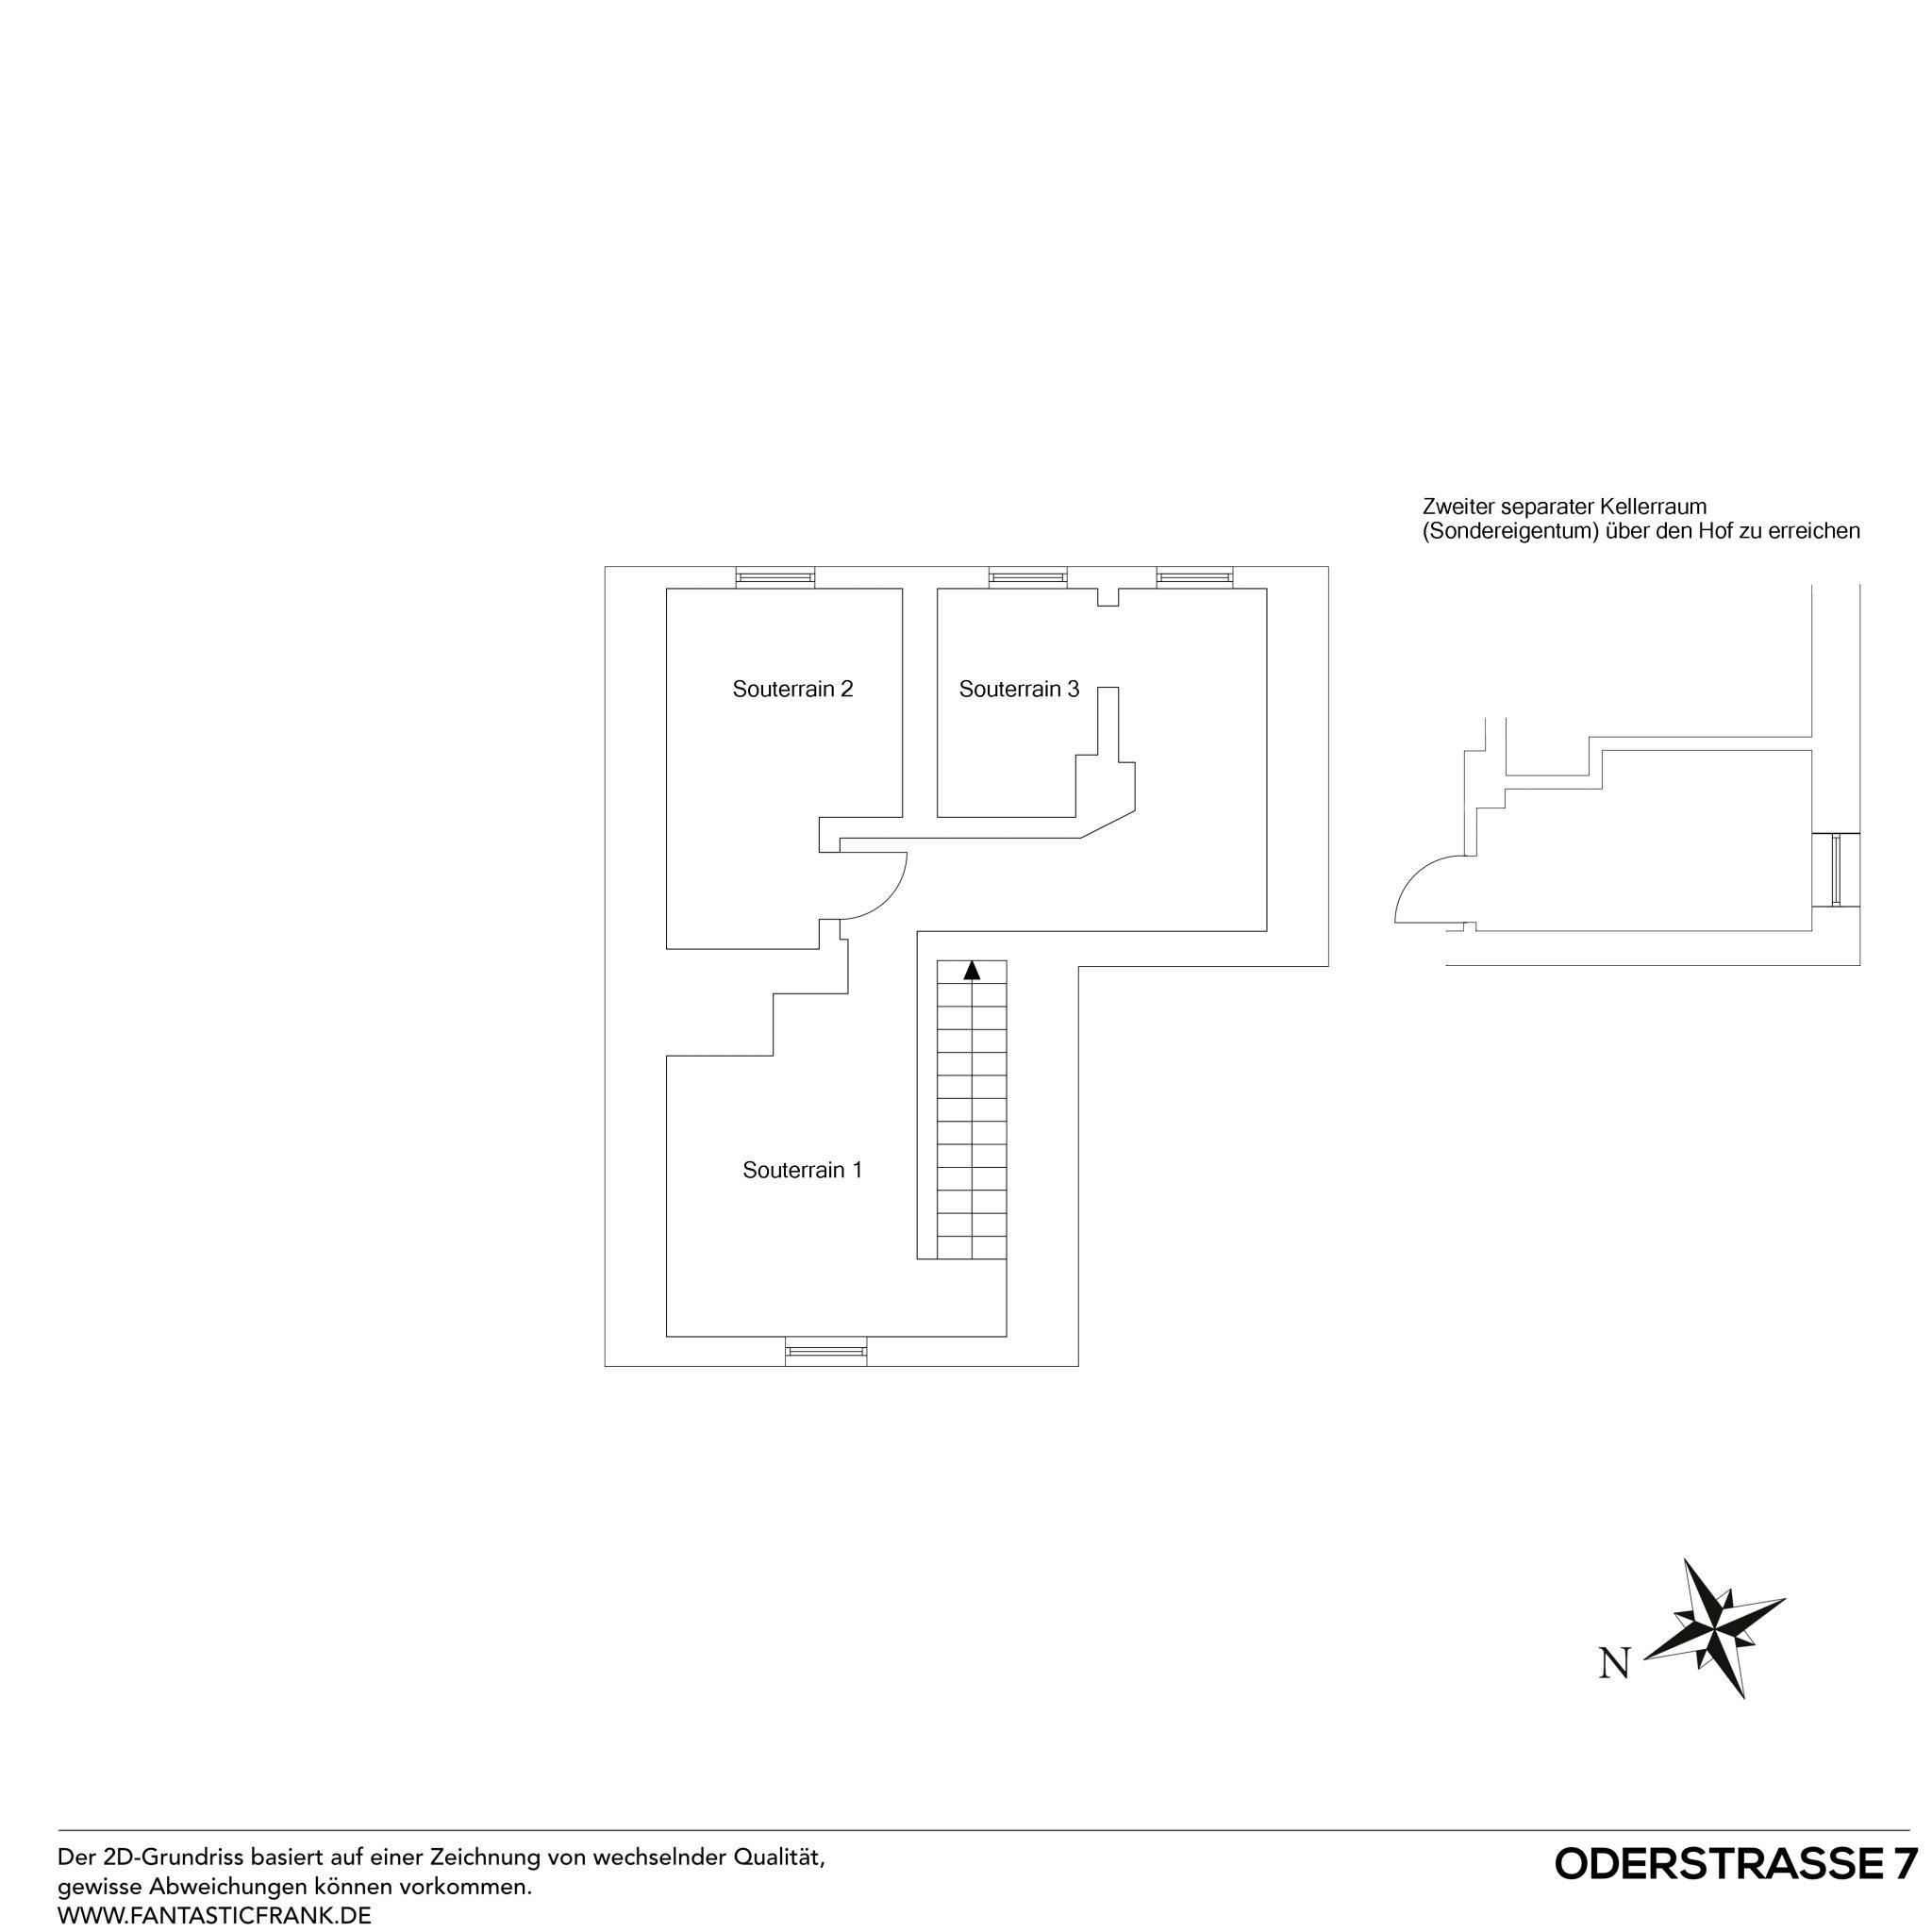 The image features a white drawing of a house with a large open space, a small room, and a bedroom. The drawing is accompanied by a description of the layout and features, including a bedroom, a small room, and a large open space.